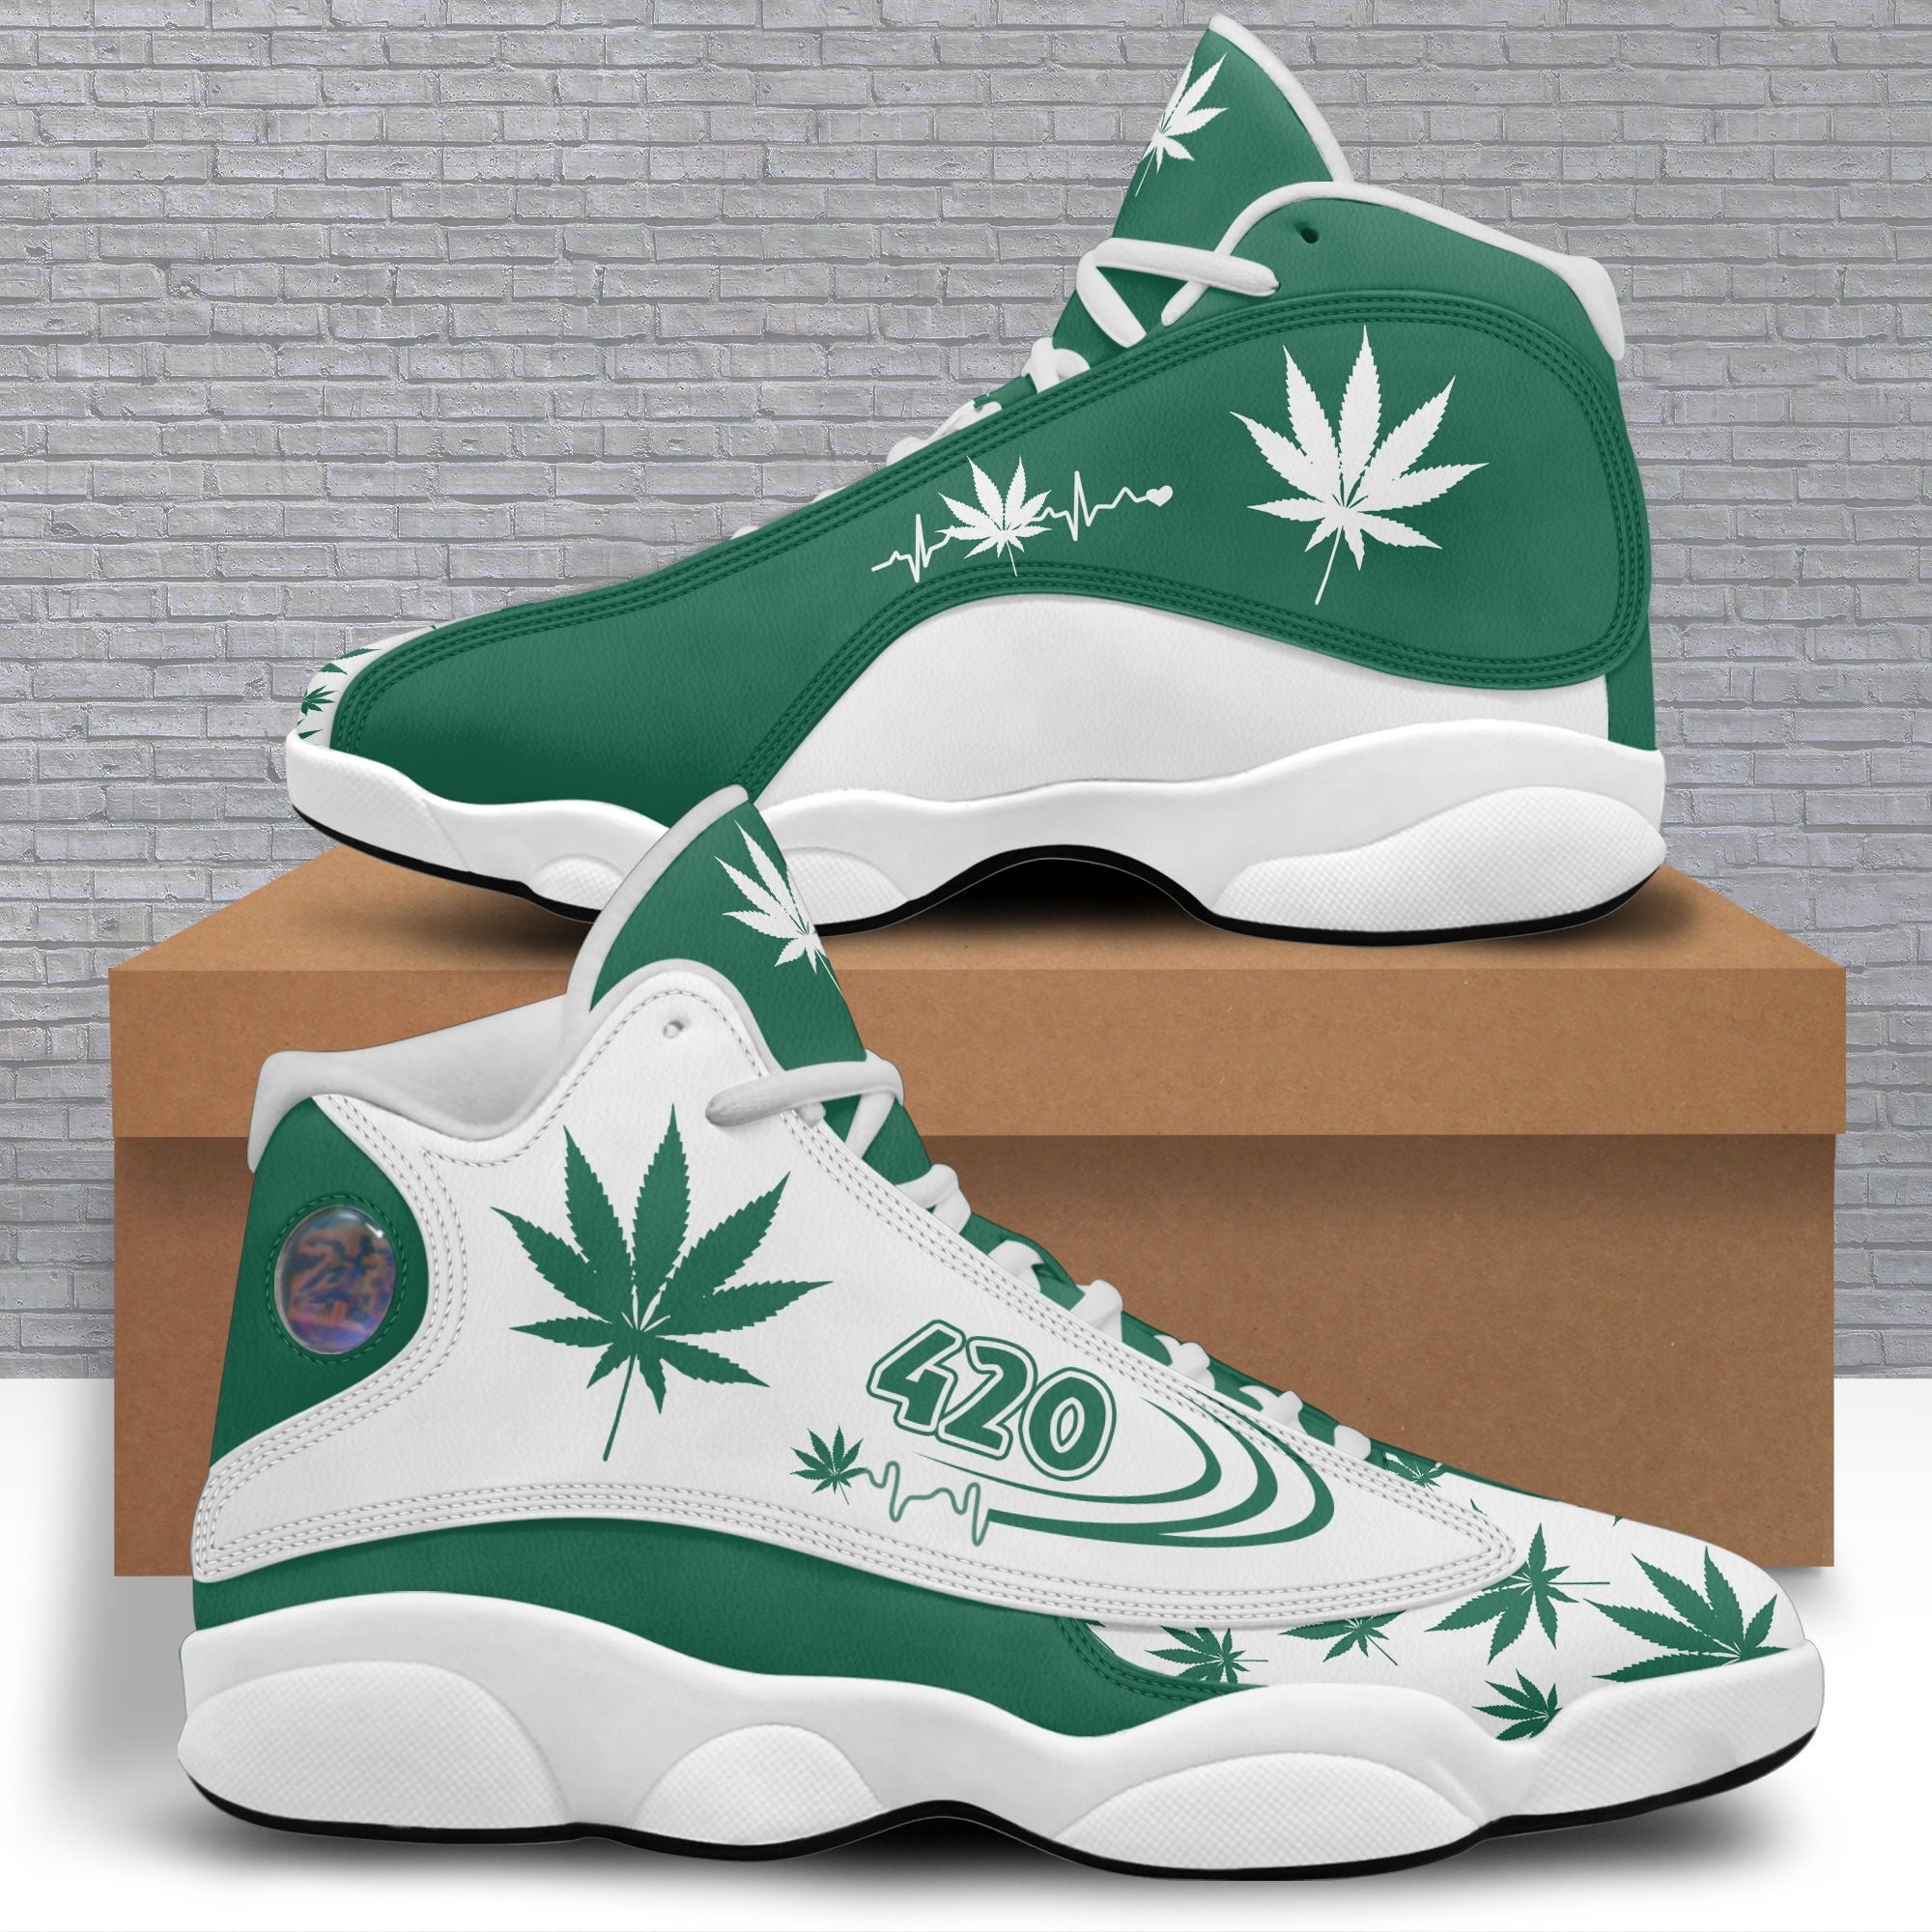 420 Green Color Shoes, Sneakers